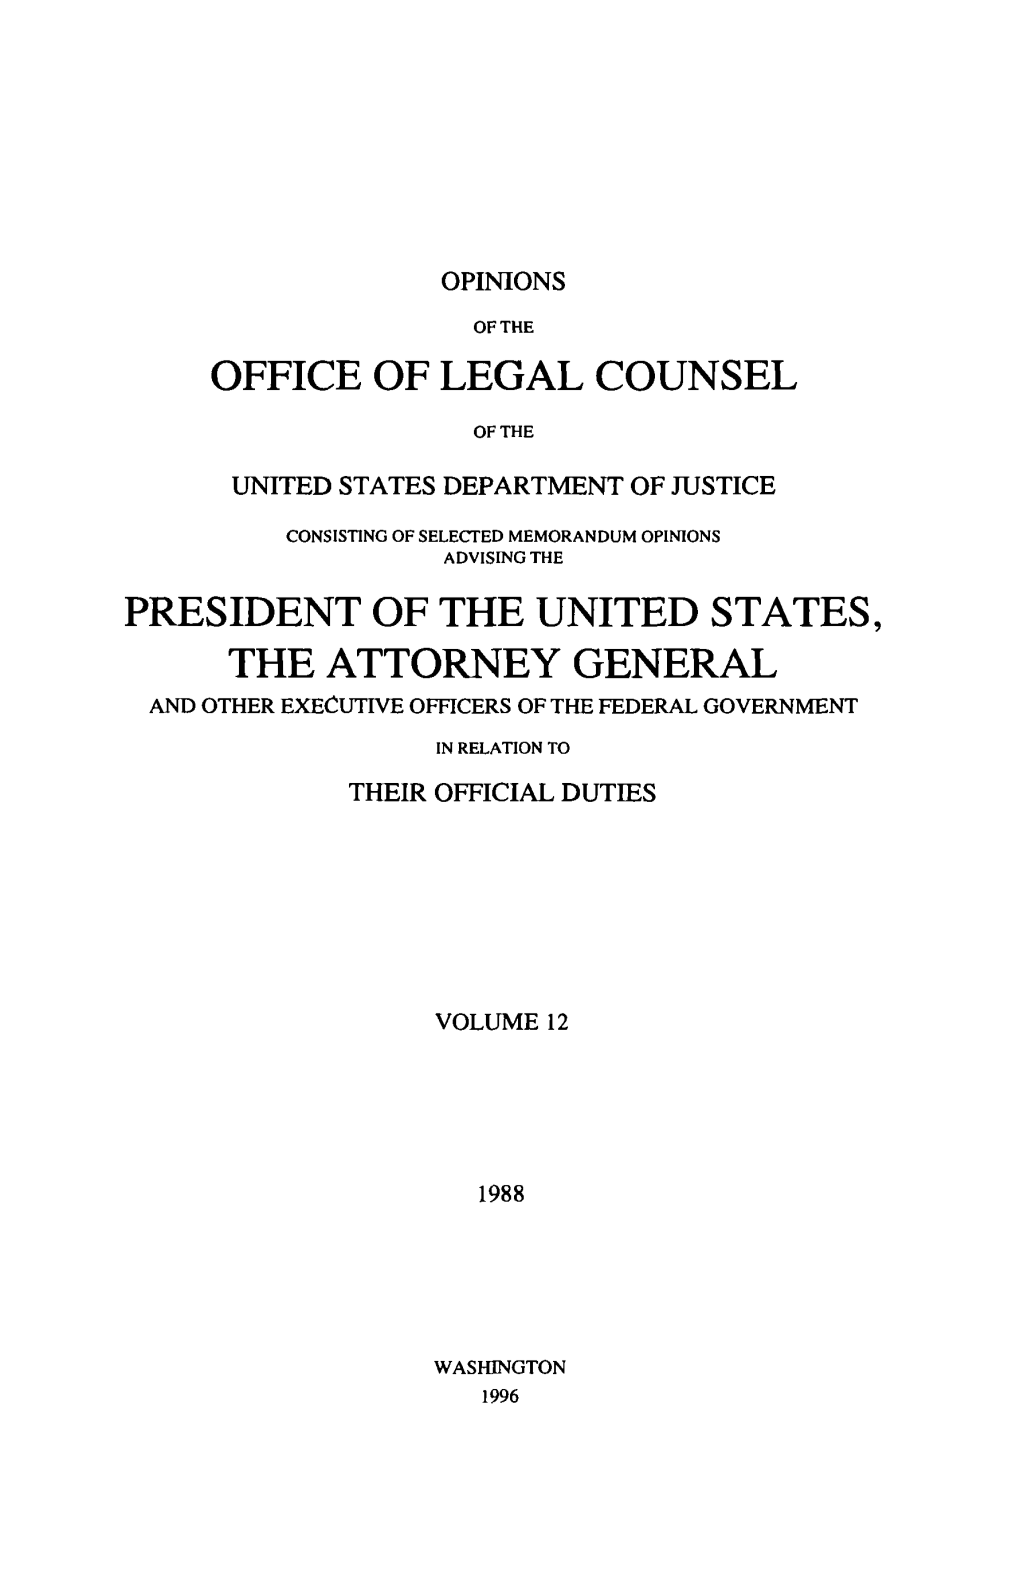 Office of Legal Counsel President of the United